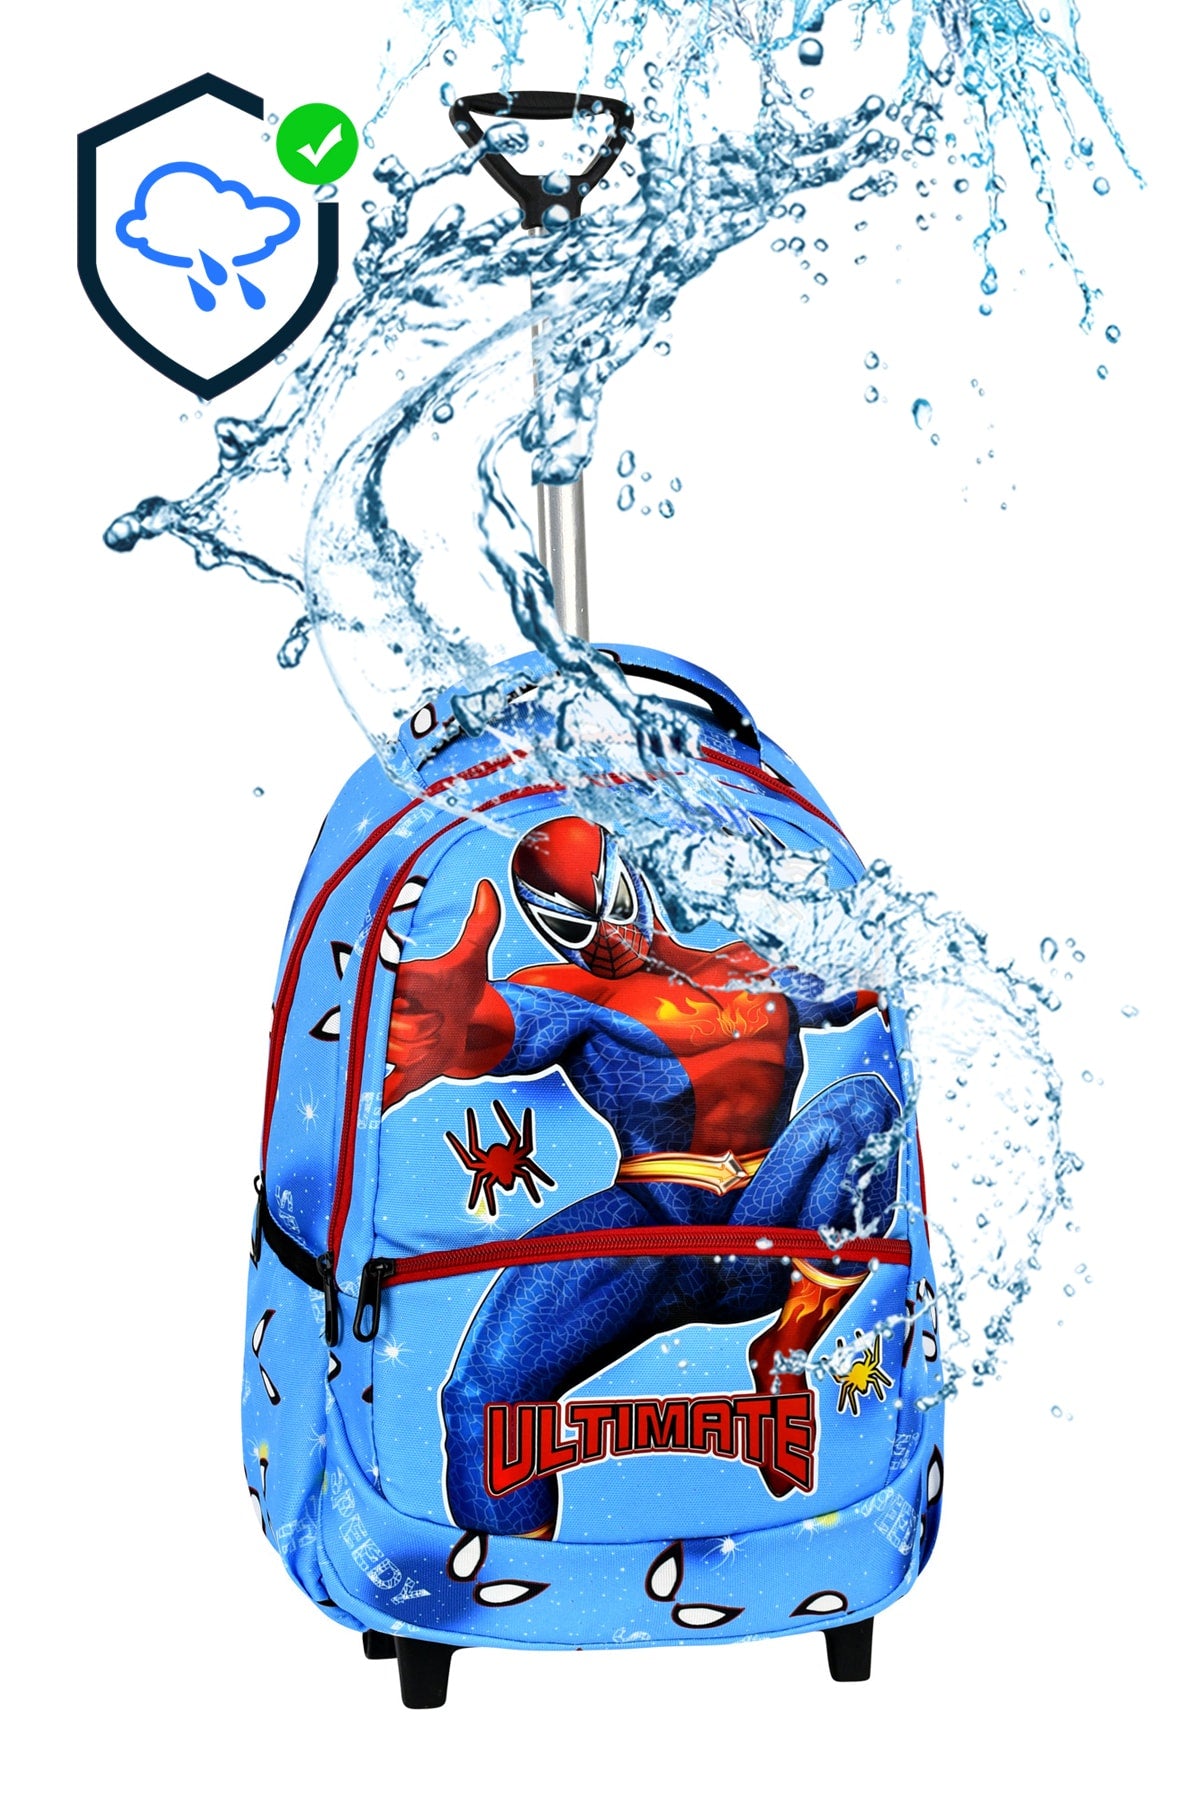 3 Pcs School Set with Squeegee, Spiderman Pattern Primary School Bag Lunch Box Pen Holder